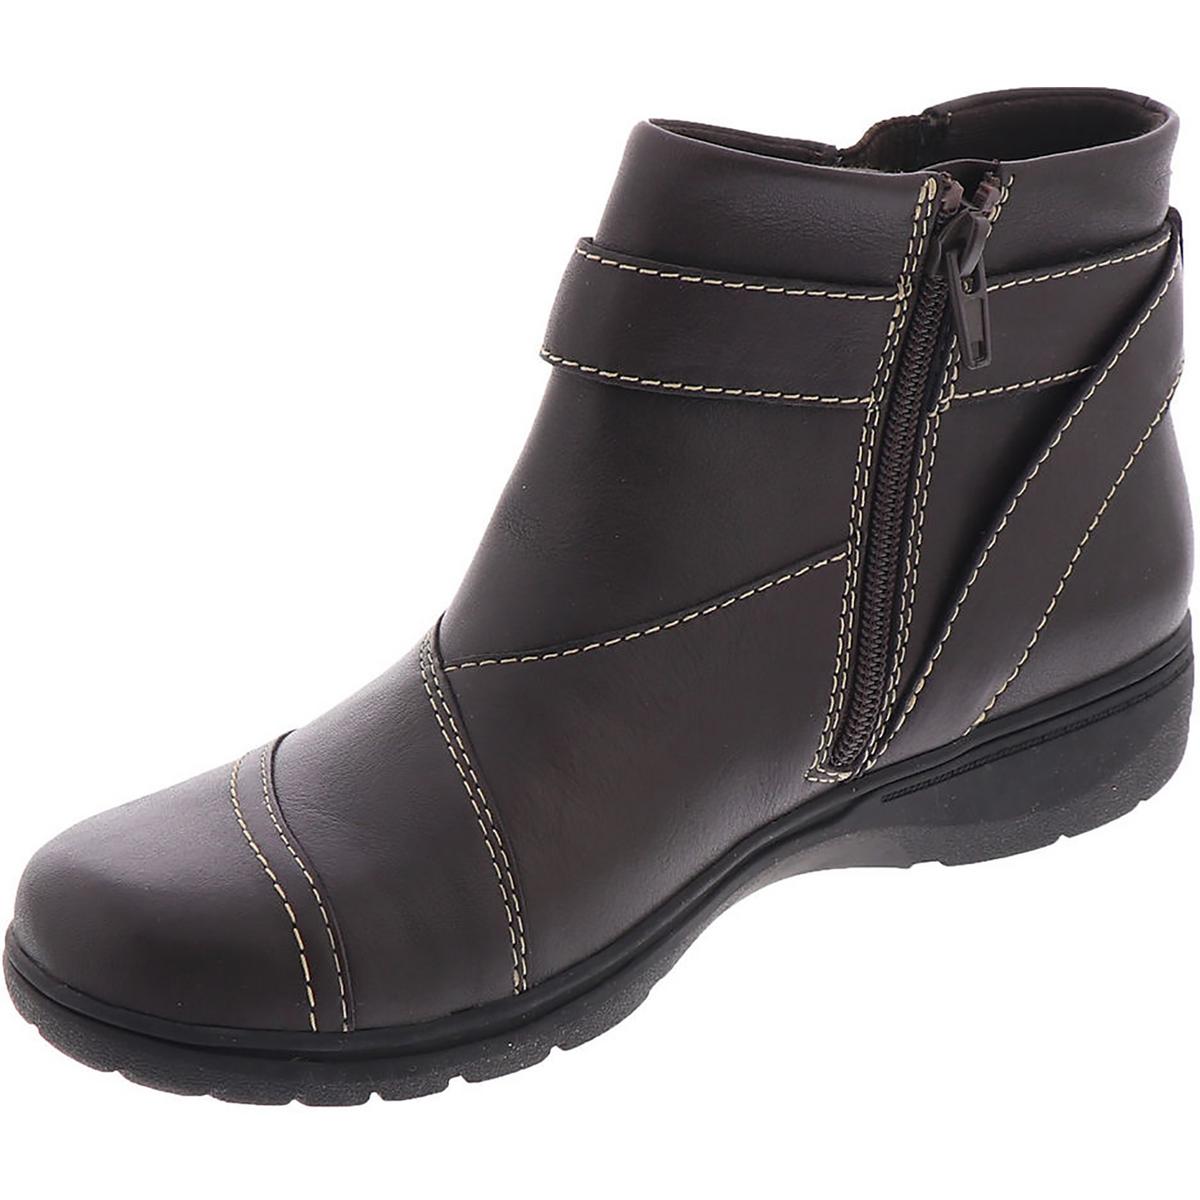 Clarks Carleigh Dalia Womens Leather Buckle Ankle Boots